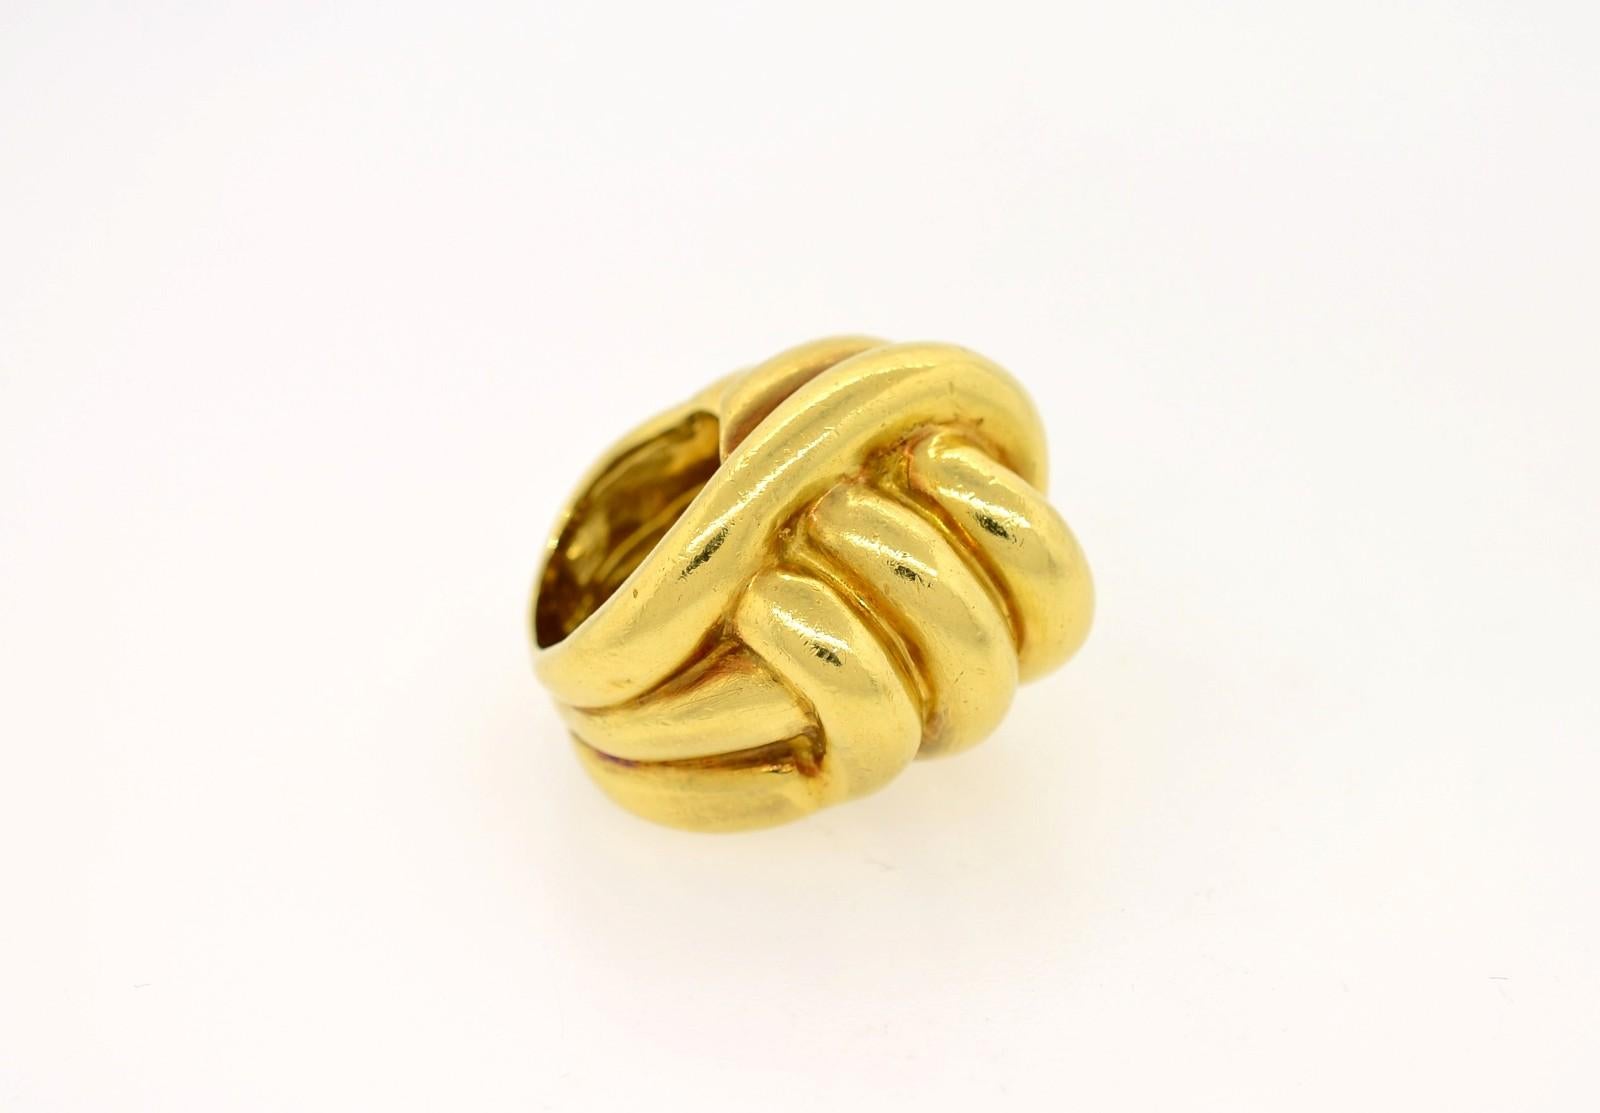 An impressive bold 18KT yellow gold ring of interlocking knot design. The size 6.5 ring is enhanced by its natural patina of fifty years since its creation.  Circa 1970s.   Quite a statement!